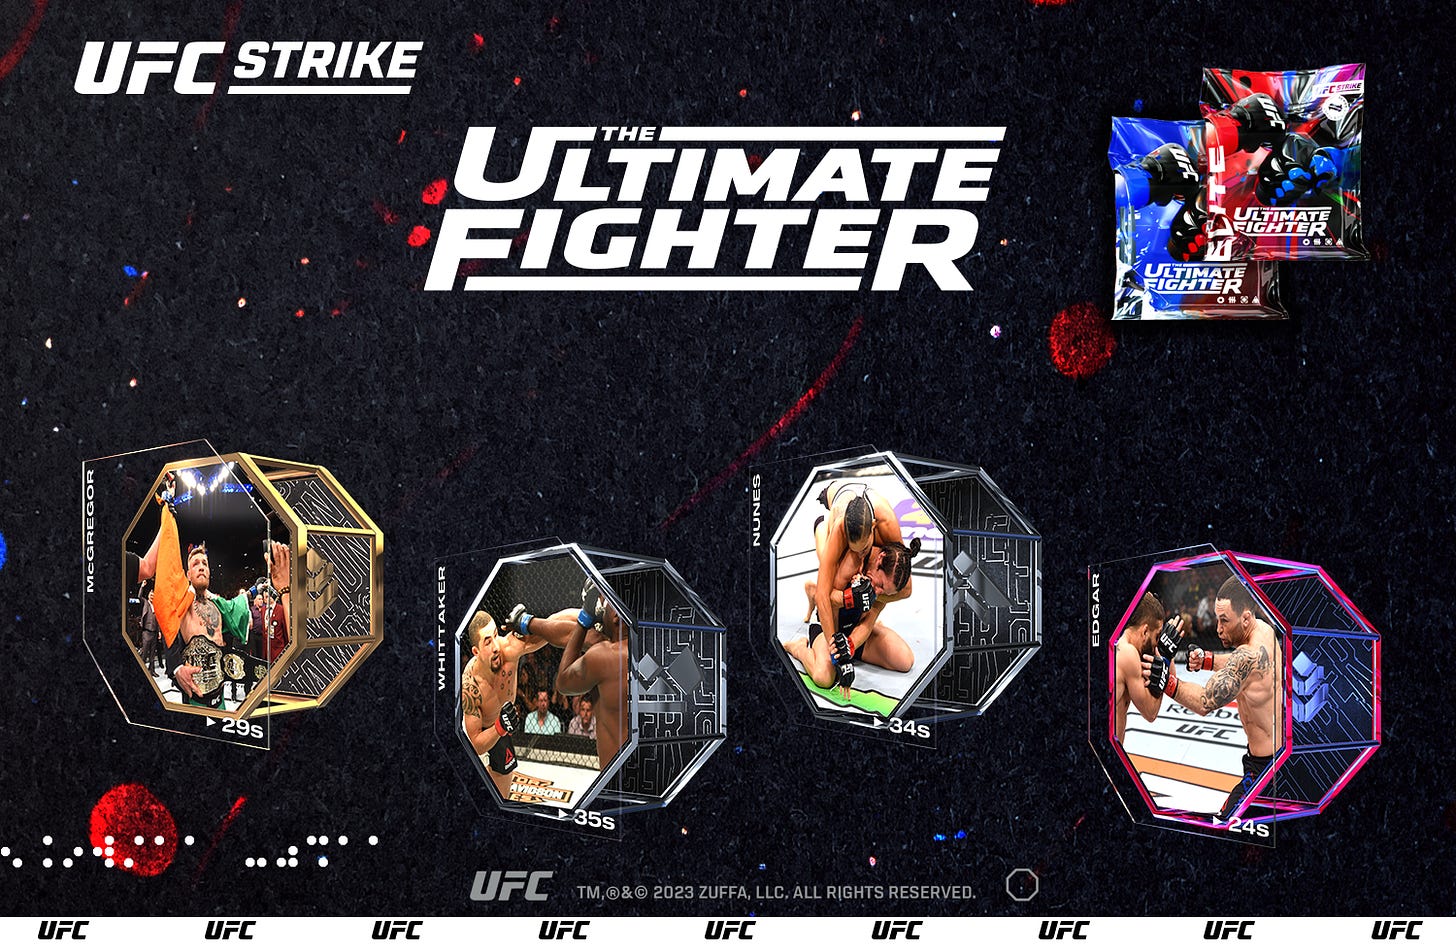 Featuring fighters that were either coaches or contestants on the show, this pack brings some of TUF's best moments to UFC Strike 🔥